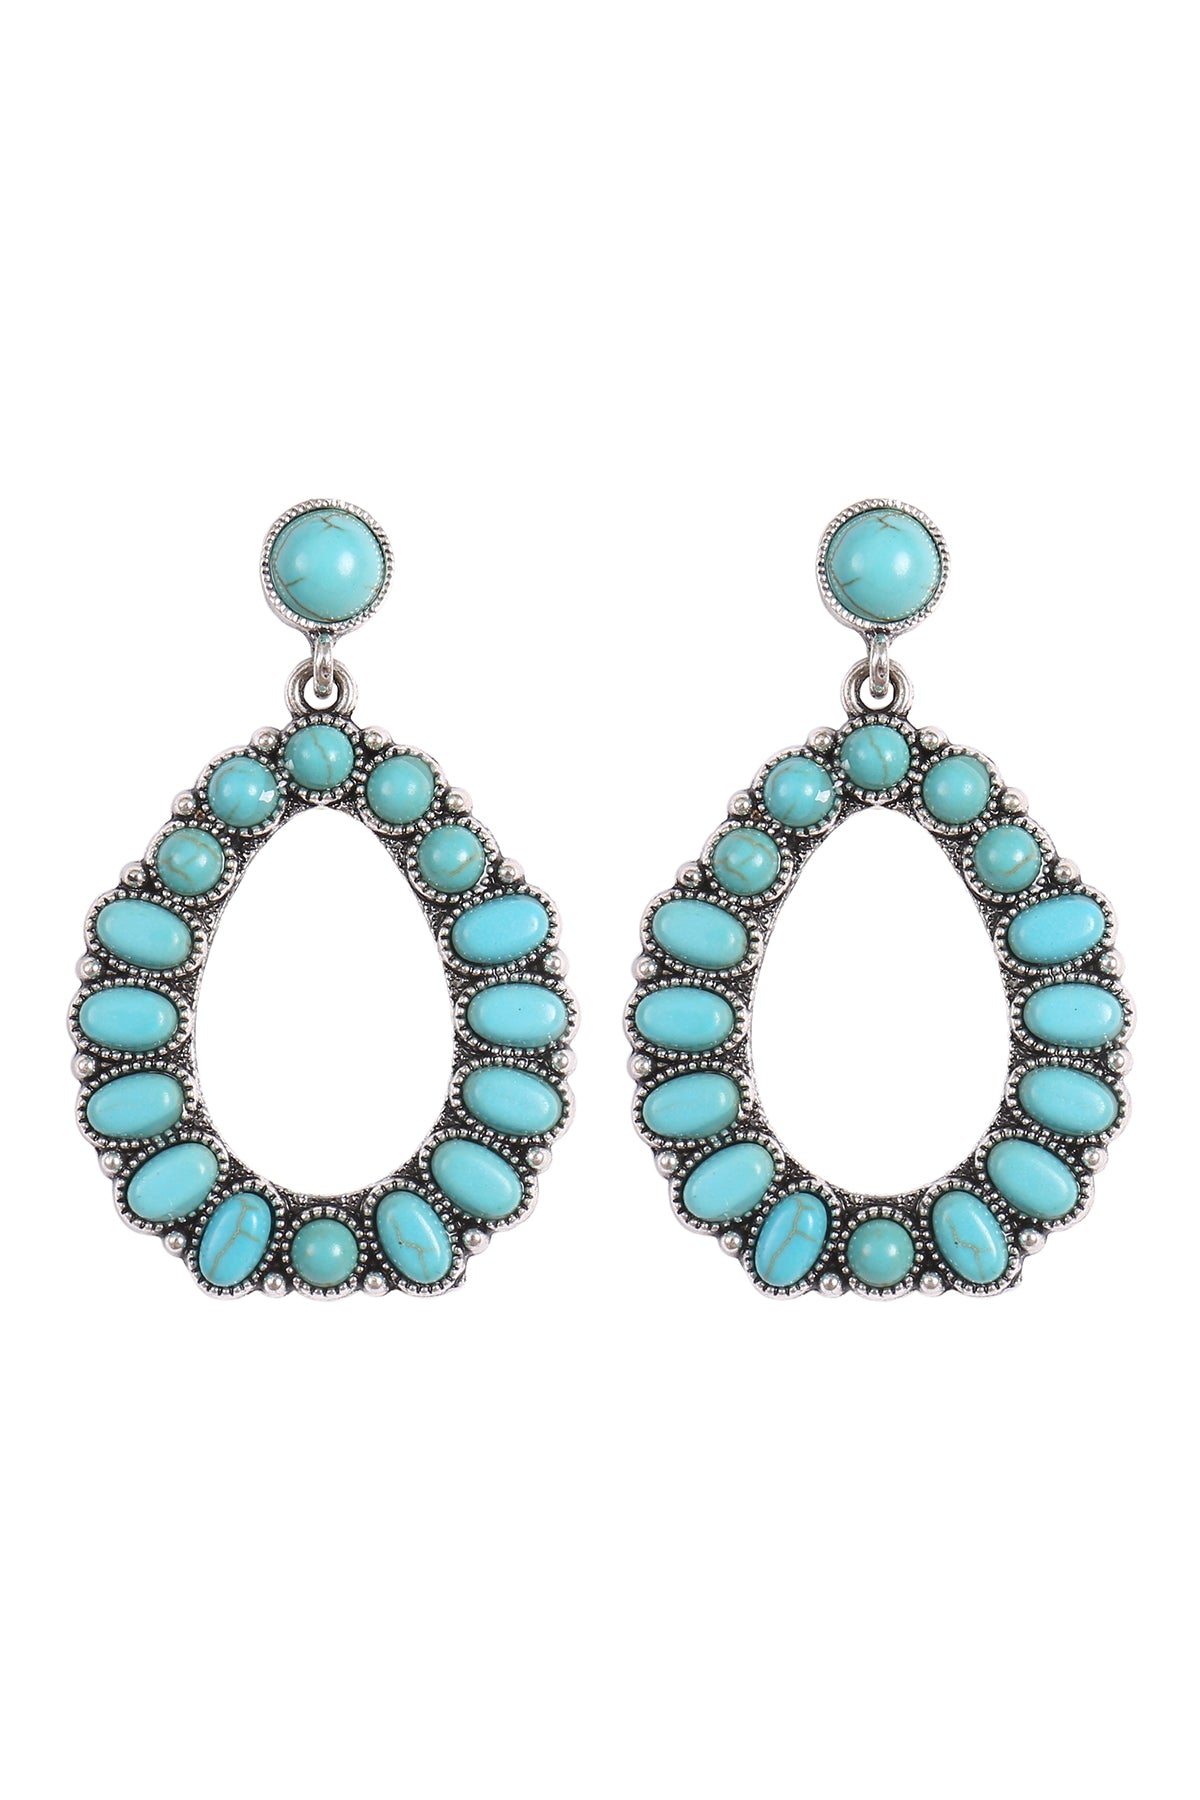 WESTERN CONCHO NATURAL STONE DROP DANGLE EARRINGS (NOW $ 4.75 ONLY!)